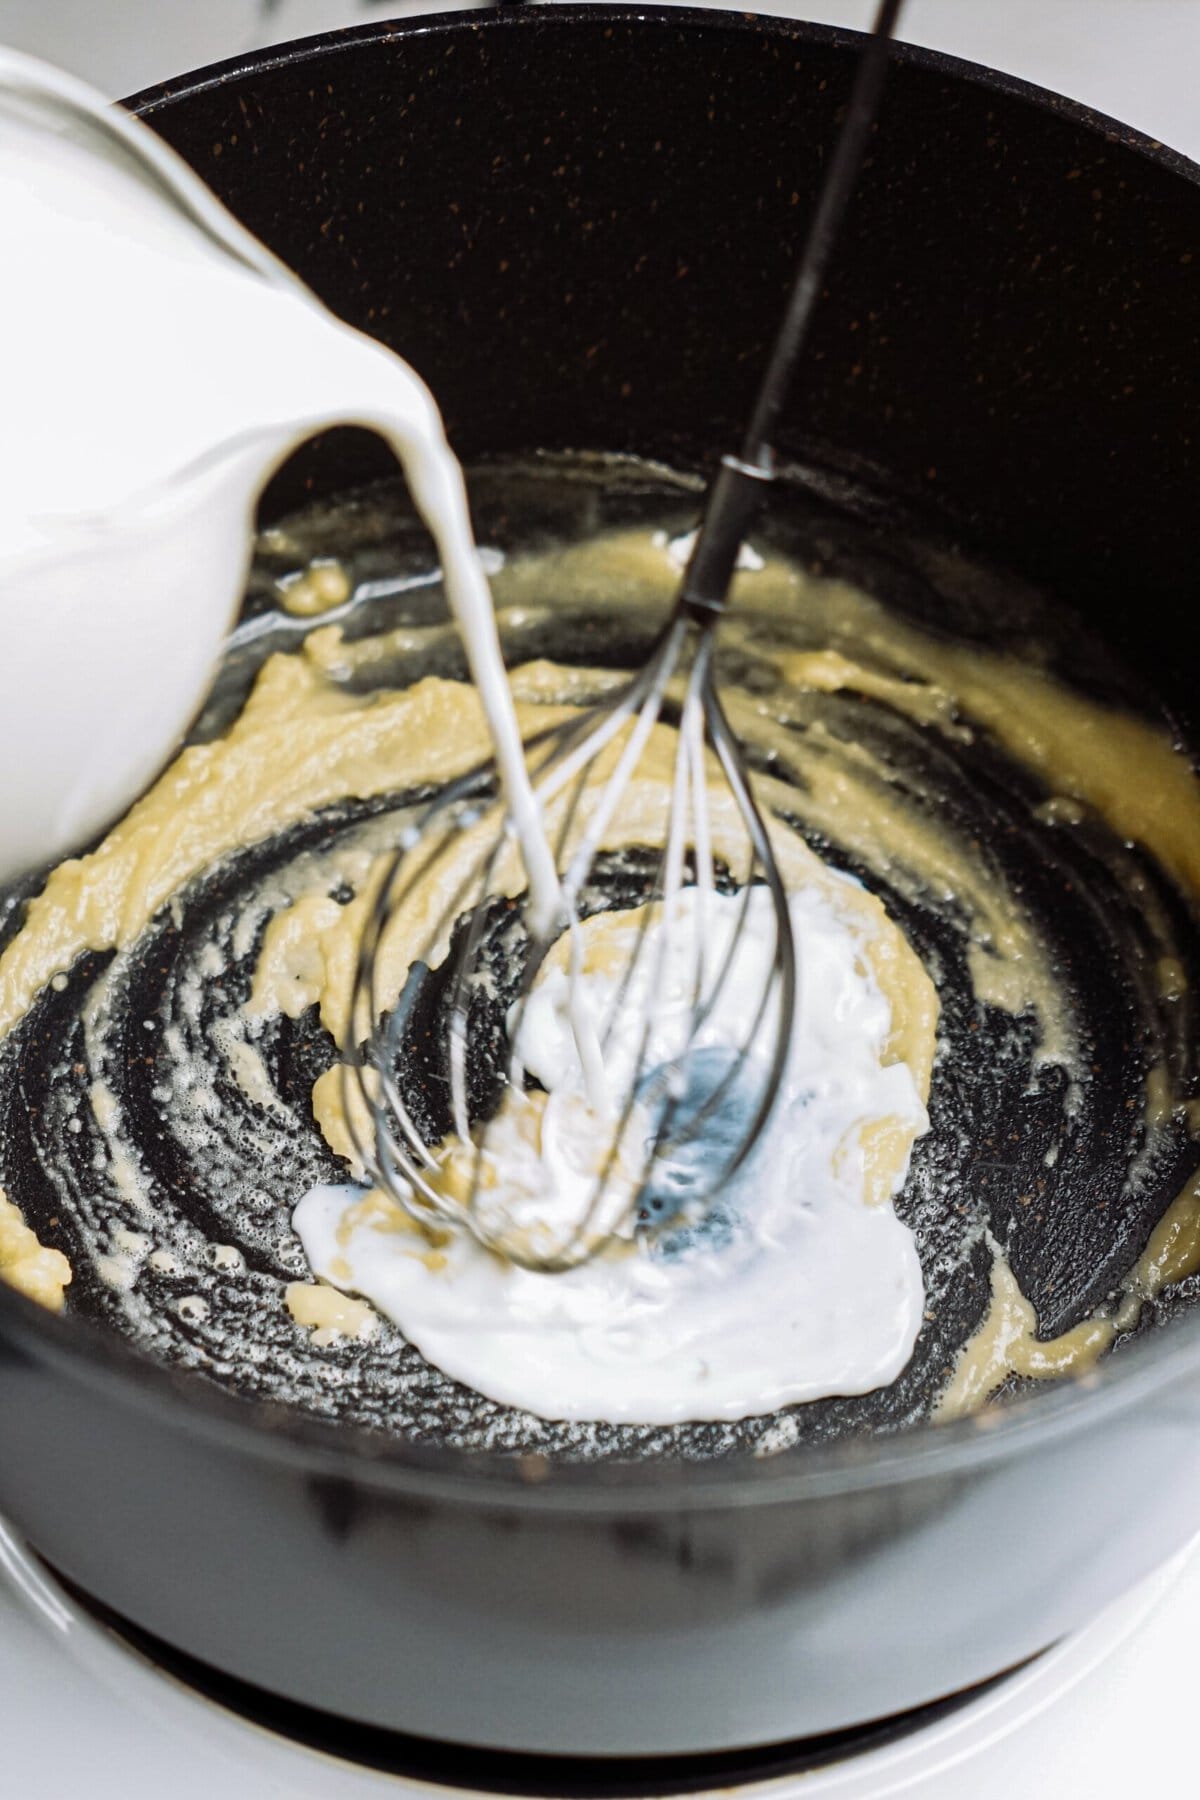 Milk being poured into a batter mixture with a whisk in a black bowl.